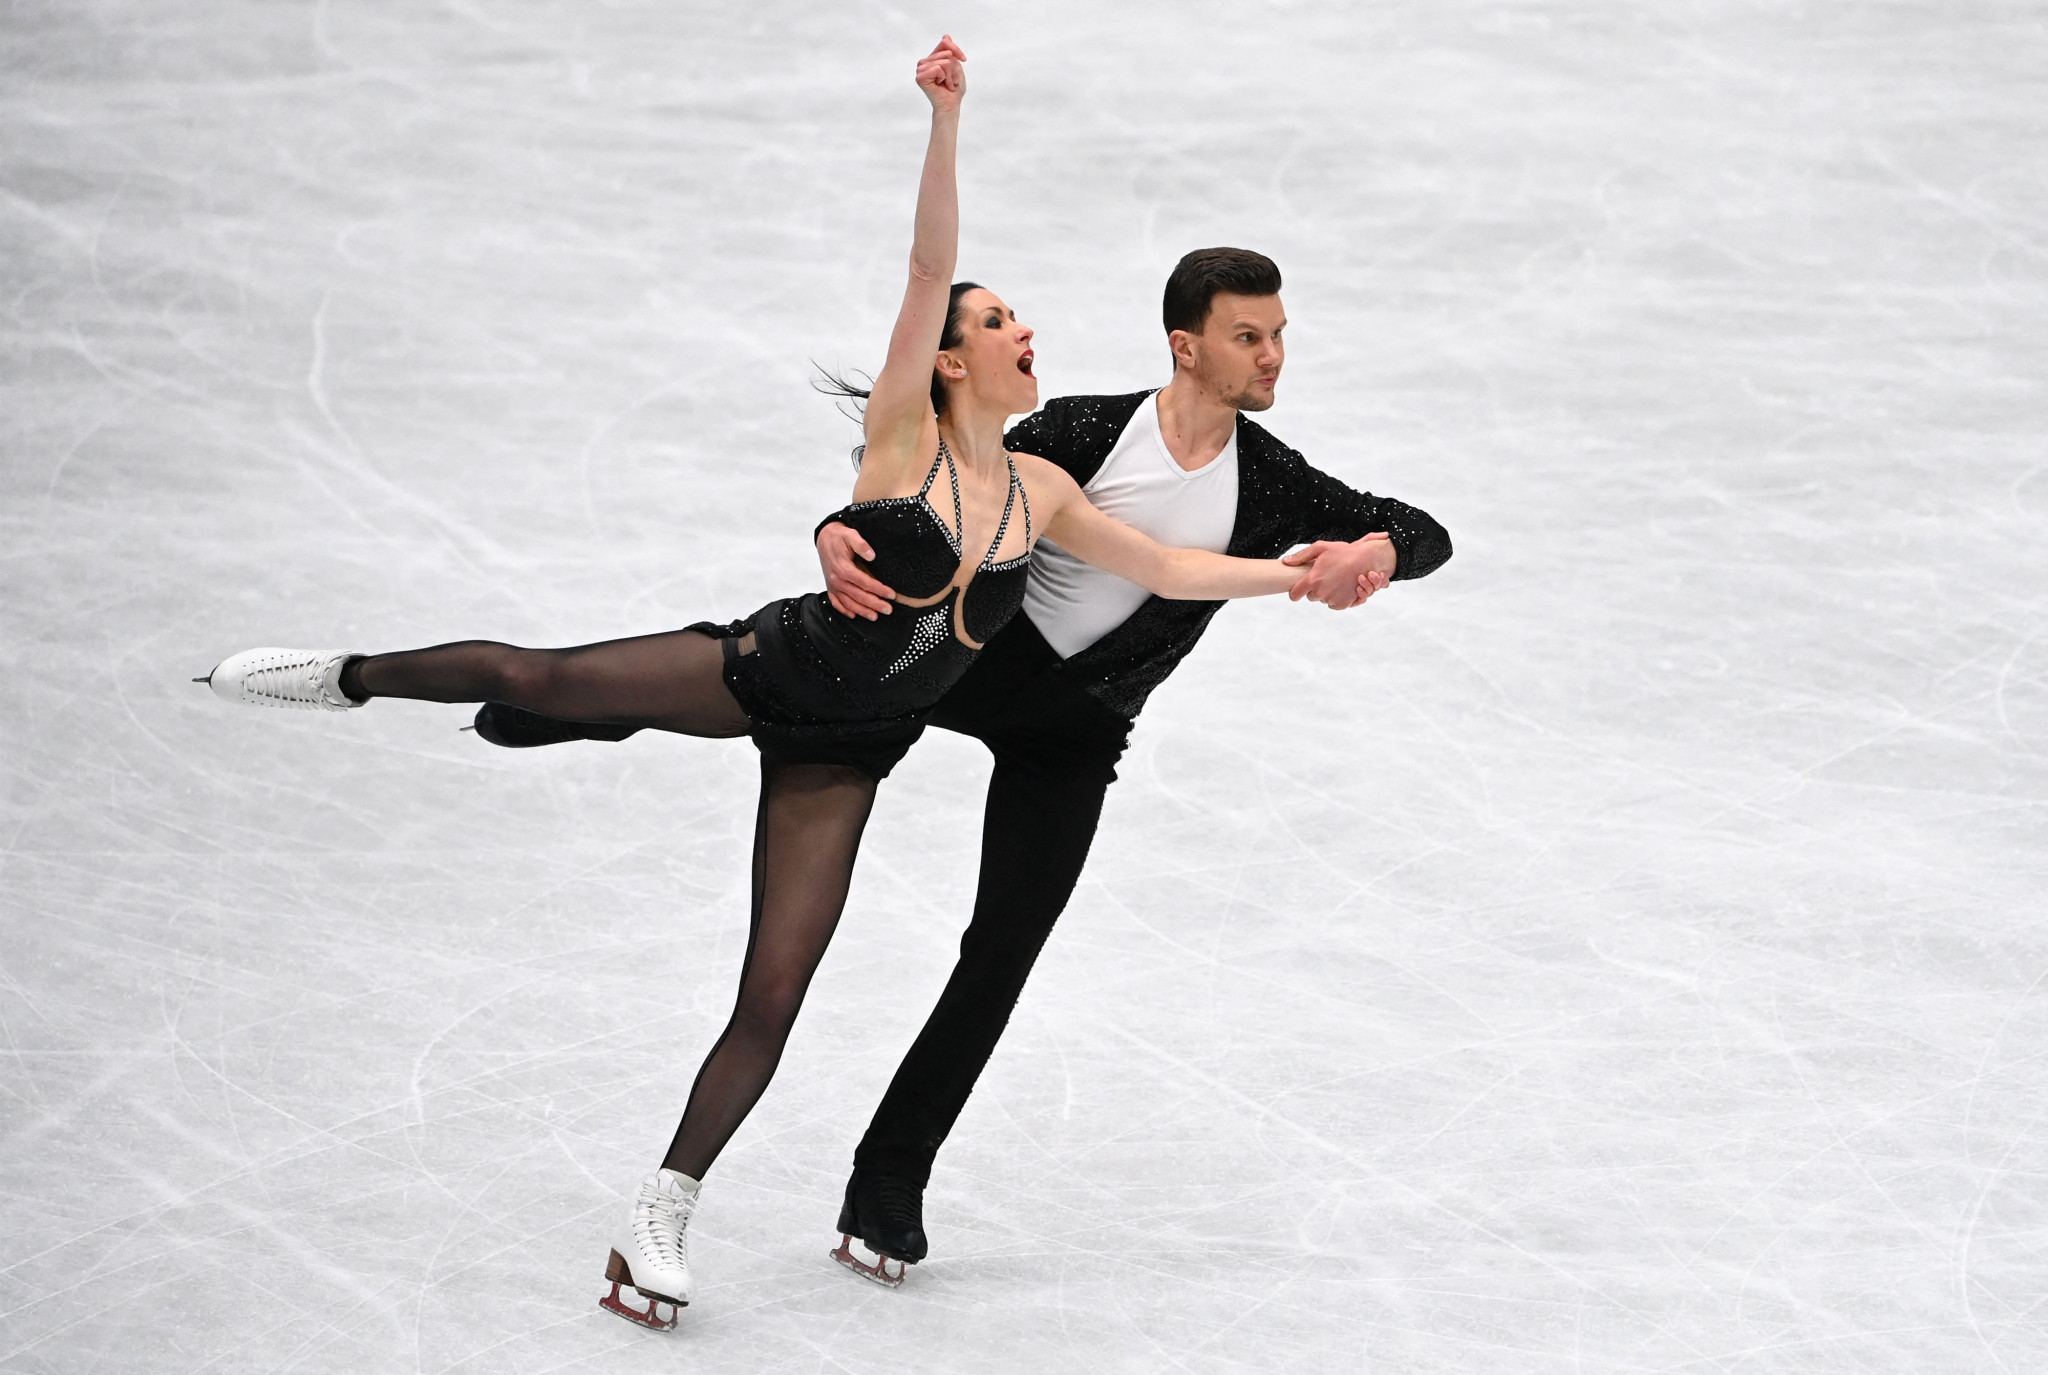 Britain to host ISU Figure Skating Grand Prix for first time